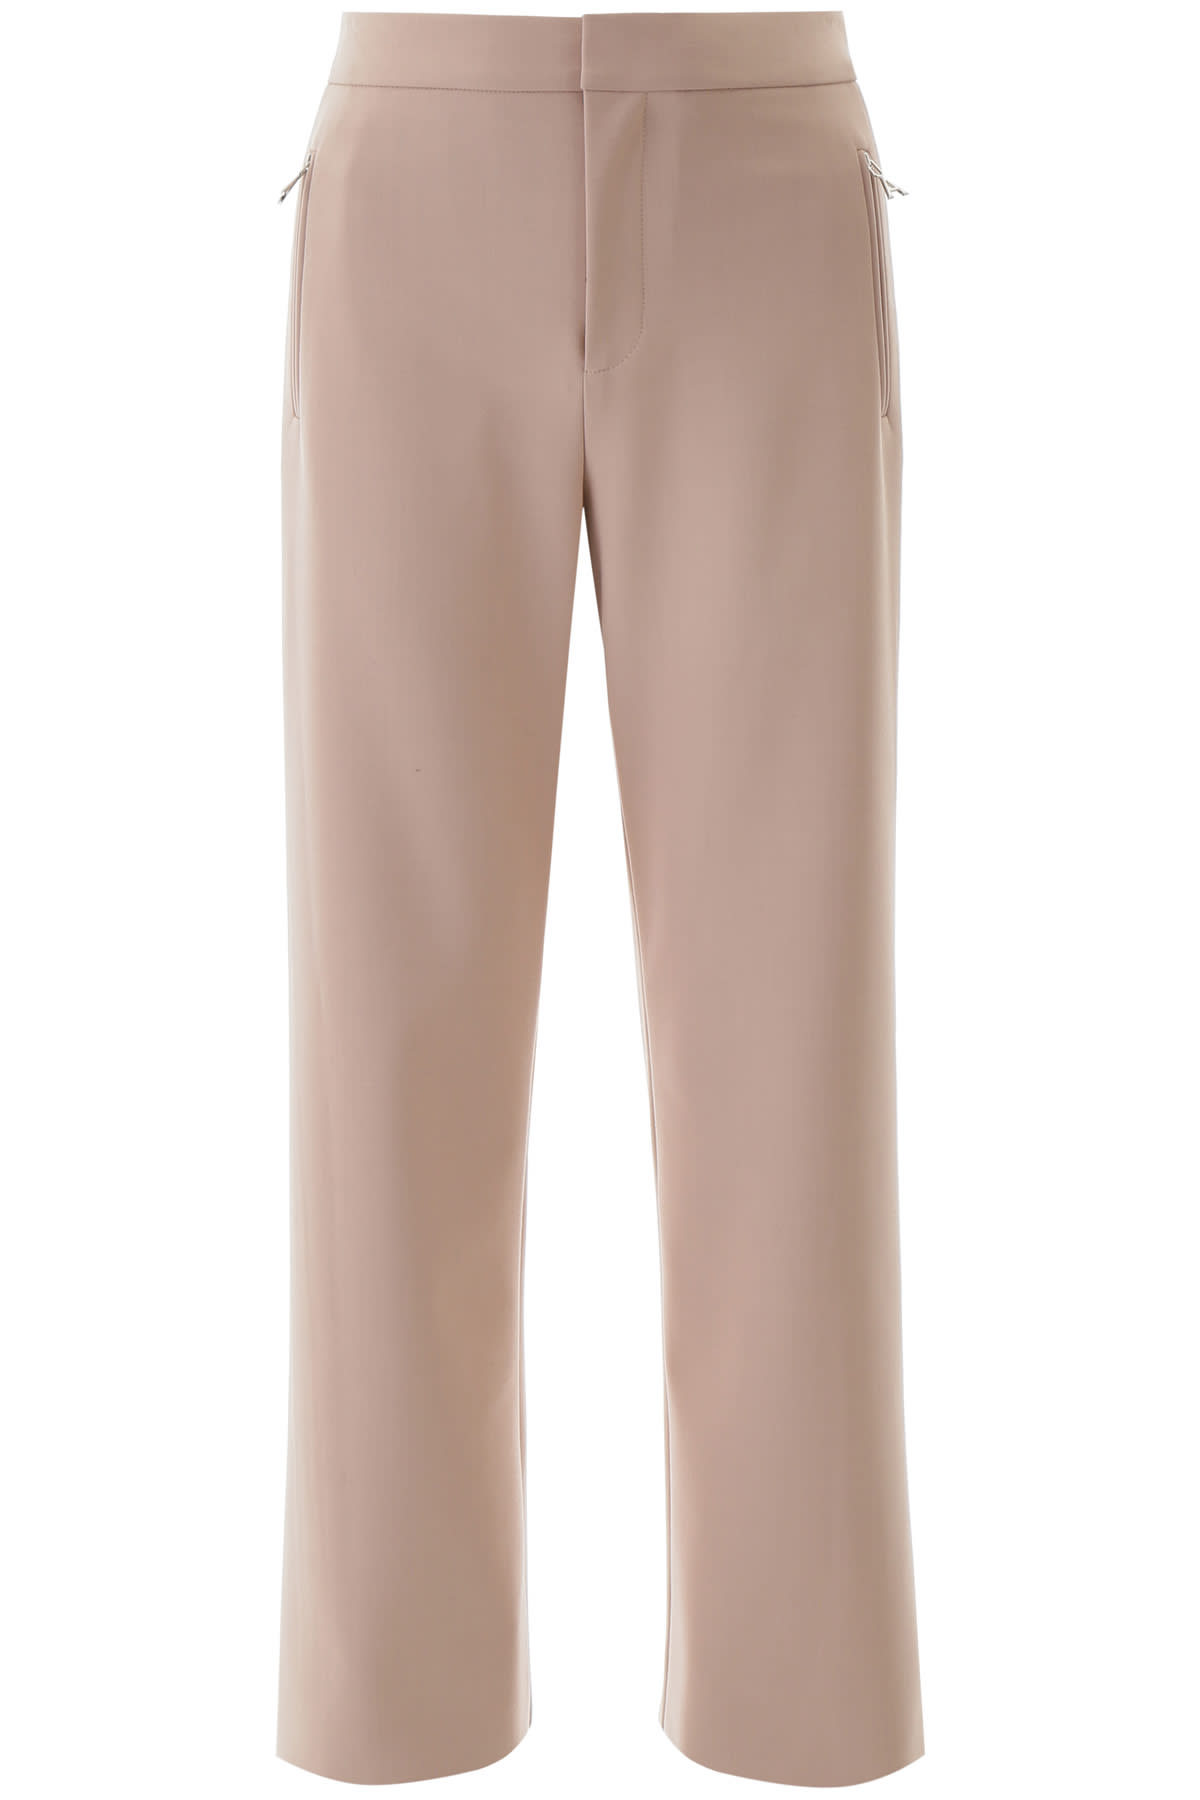 AREA PALAZZO PANTS WITH CRYSTALS,RE20P08032 NUDE